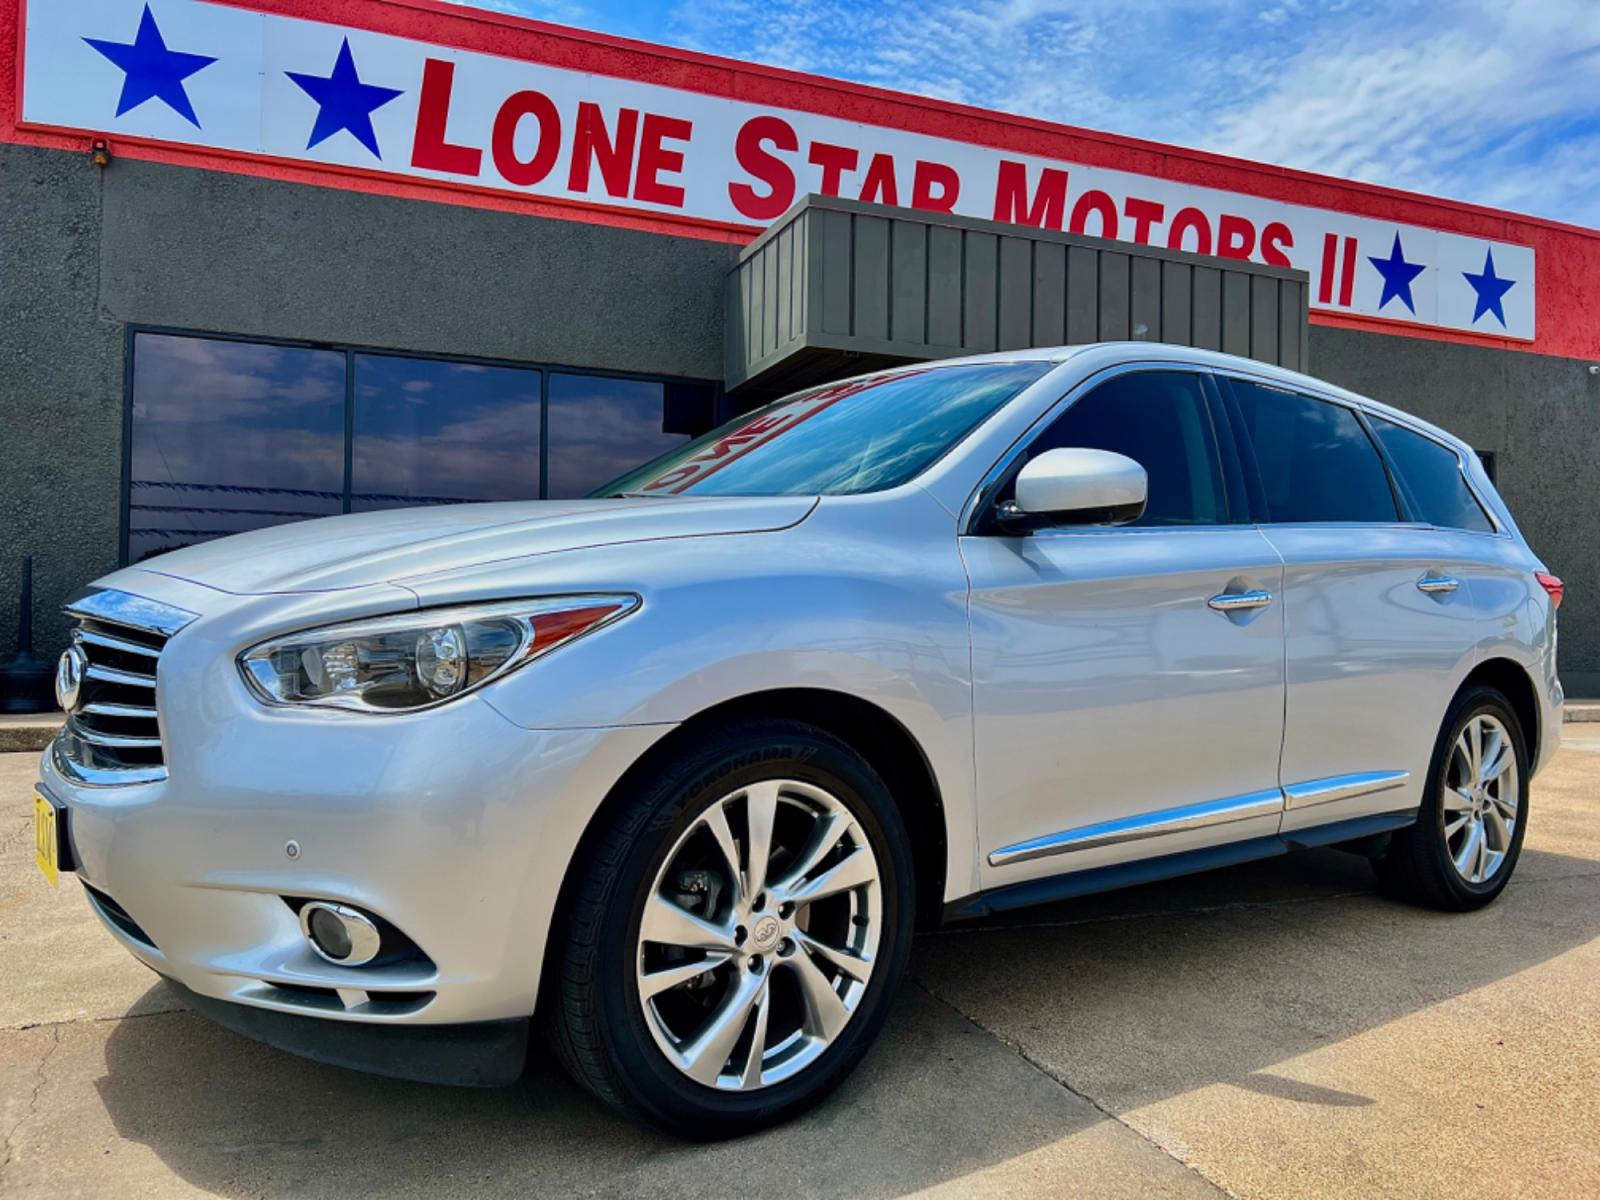 2013 SILVER INFINITI JX35 (5N1AL0MM3DC) , located at 5900 E. Lancaster Ave., Fort Worth, TX, 76112, (817) 457-5456, 0.000000, 0.000000 - This is a 2013 INFINITI JX35 4 DOOR SUV that is in excellent condition. There are no dents or scratches. The interior is clean with no rips or tears or stains. All power windows, door locks and seats. Ice cold AC for those hot Texas summer days. It is equipped with a CD player, AM/FM radio, AUX port - Photo #1